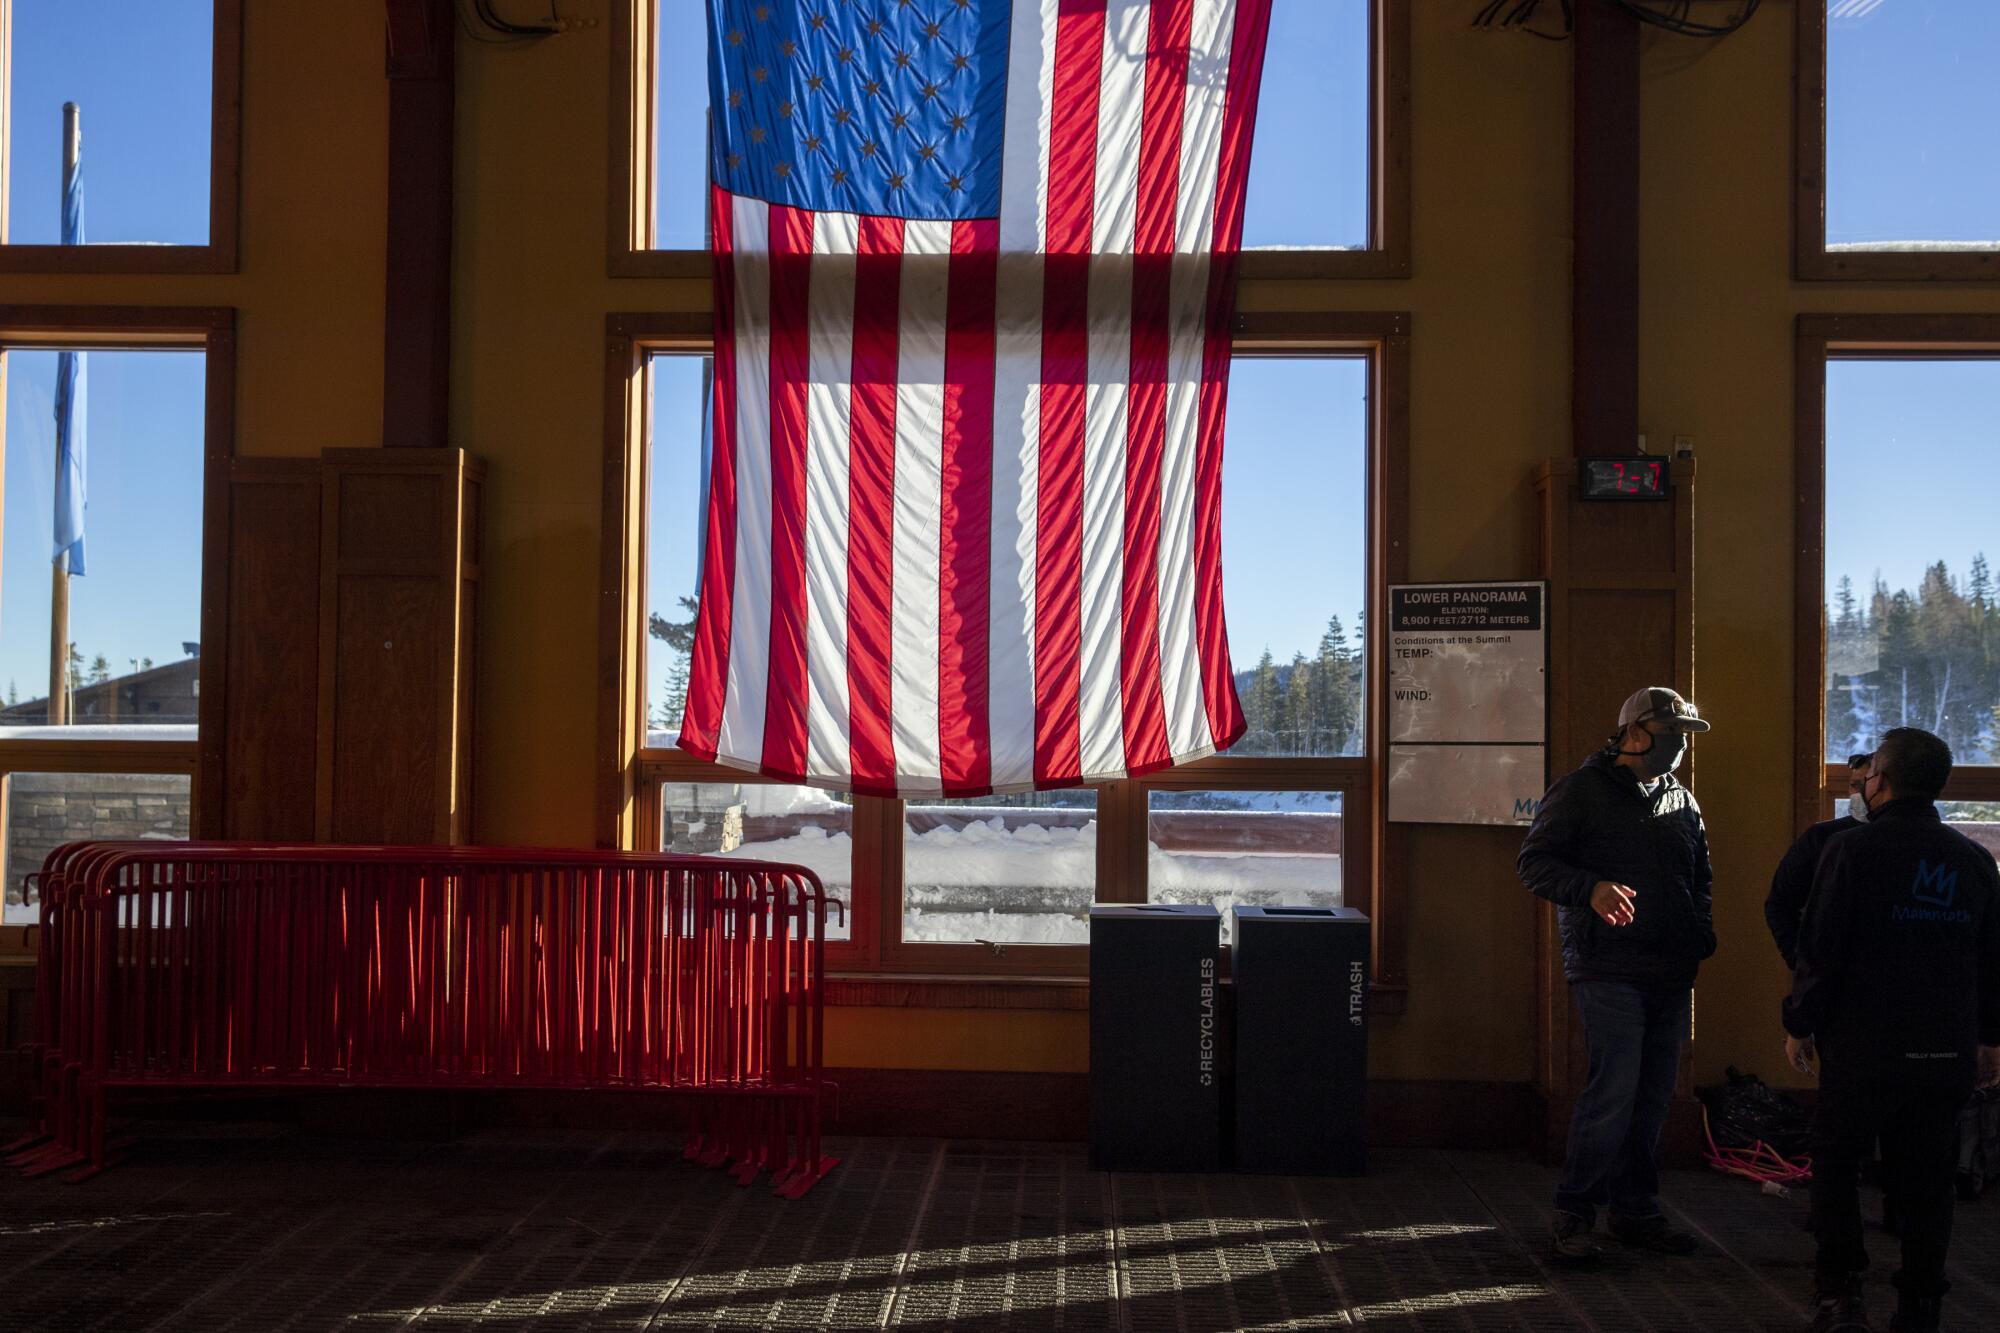 With an enormous American flag as a backdrop, ski area custodial employees confer at the Panorama Gondola base station.